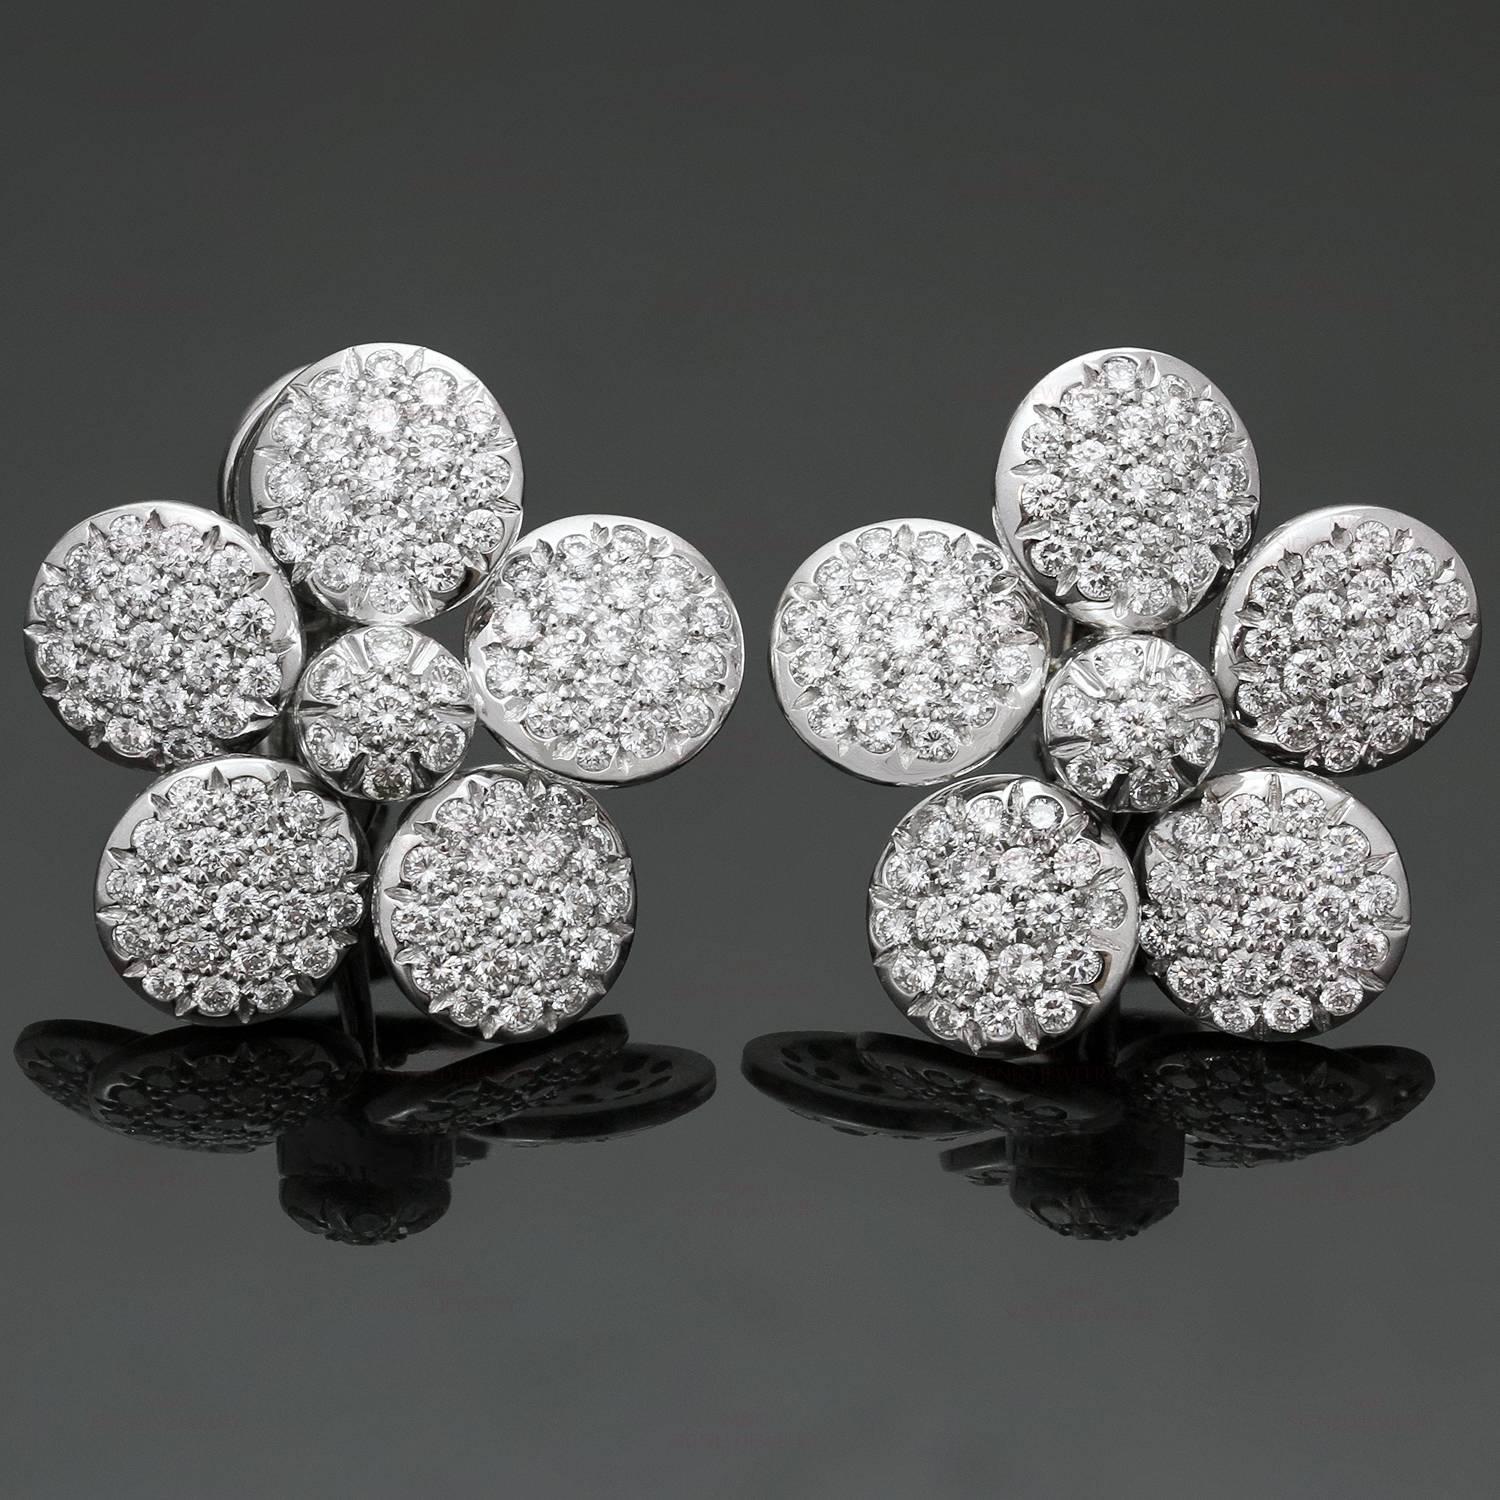 These elegant Cantamessa earrings feature a flower-shaped design crafted in 18k white gold and pave-set with an estimated 204 diamonds of an estimated 4.0 carats. These lever-back earrings are completed with collapsible posts. Made in Italy circa